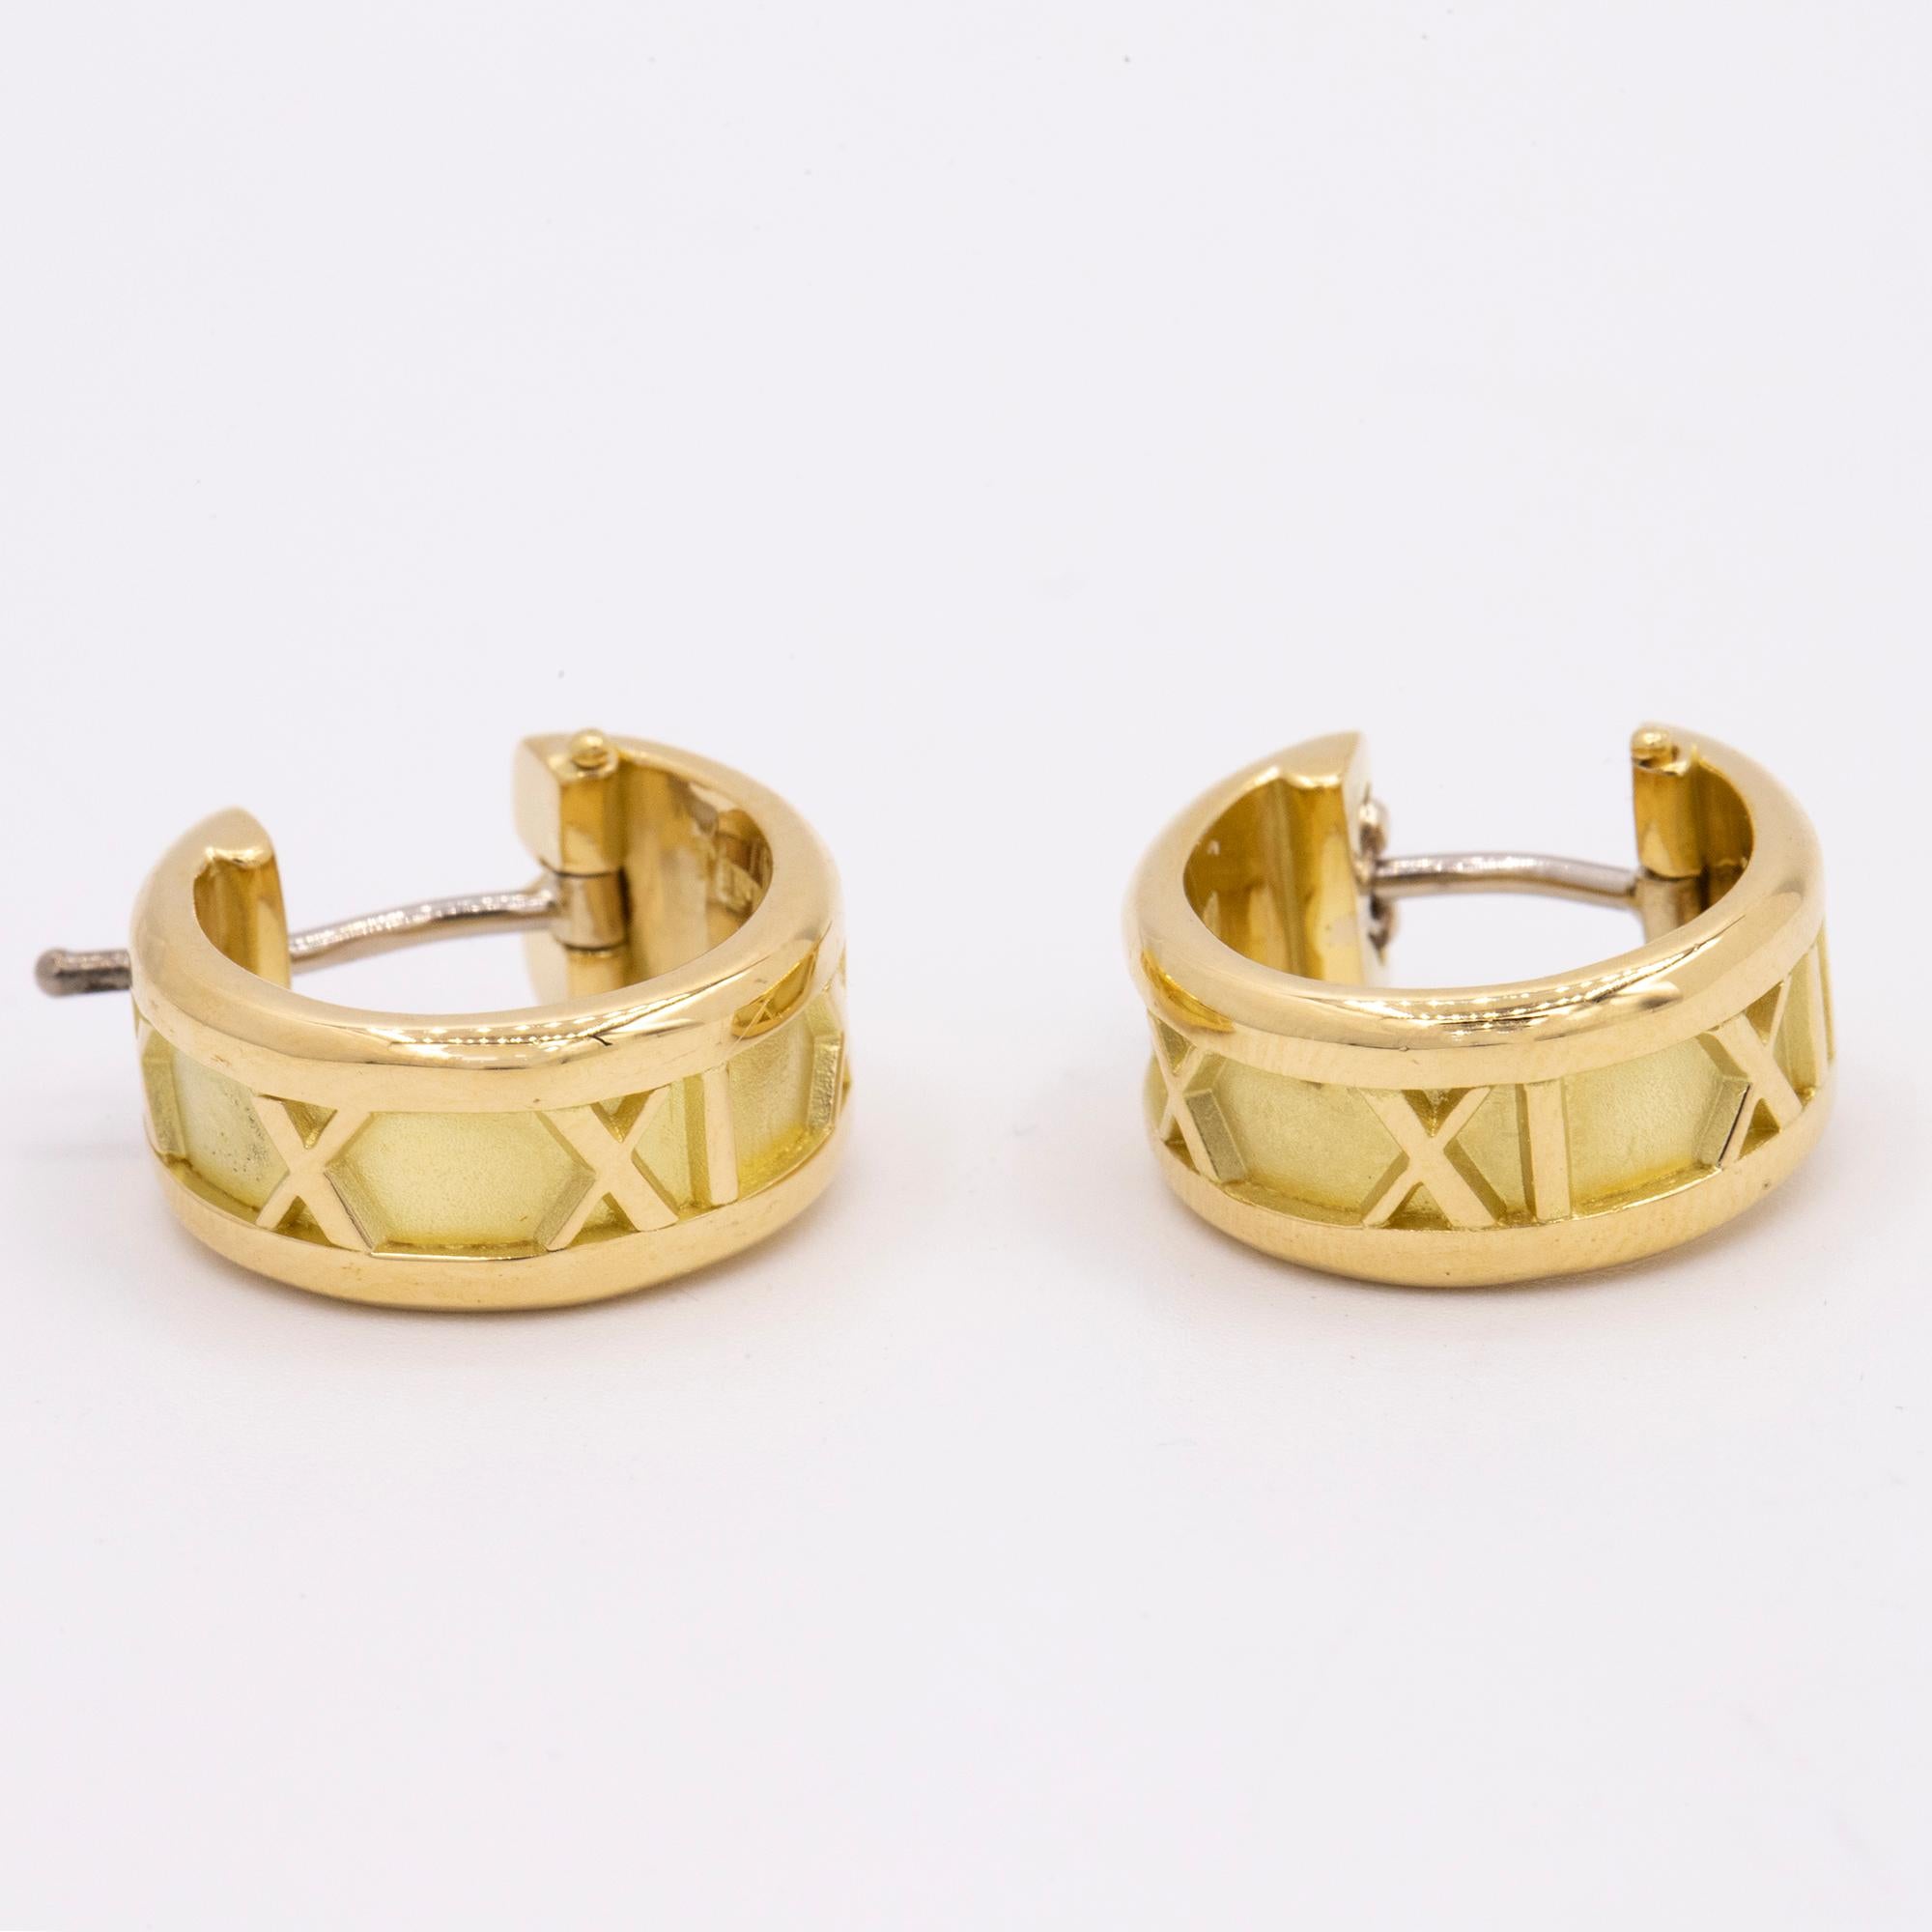 Tiffany & Co Atlas huggie earrings made out of 18kt yellow gold. Standard size.